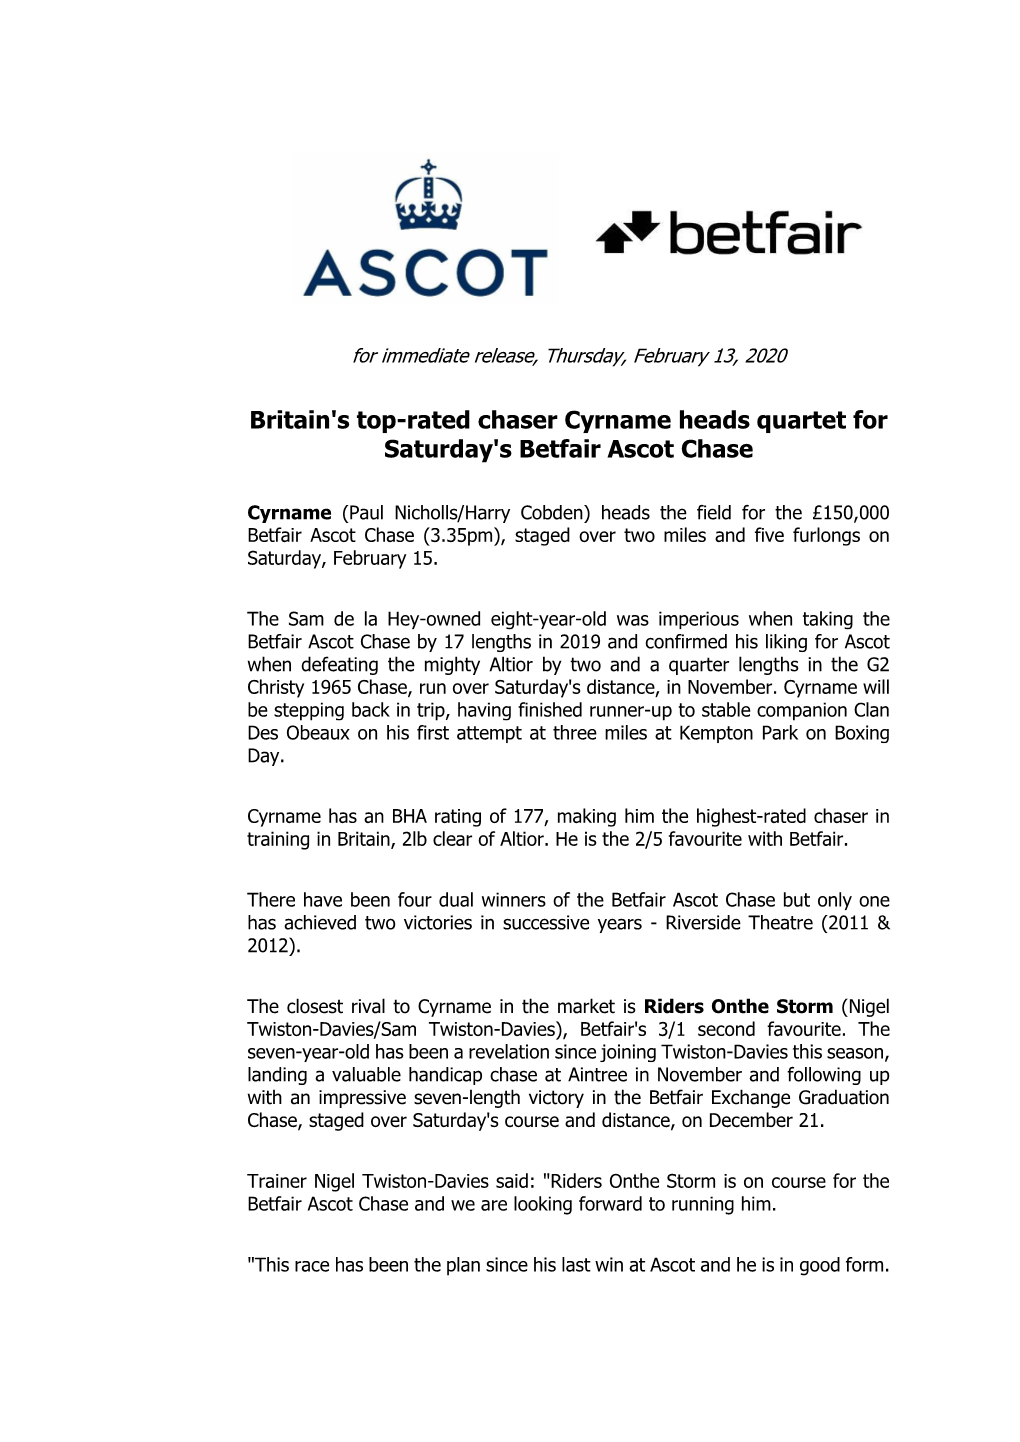 Britain's Top-Rated Chaser Cyrname Heads Quartet for Saturday's Betfair Ascot Chase